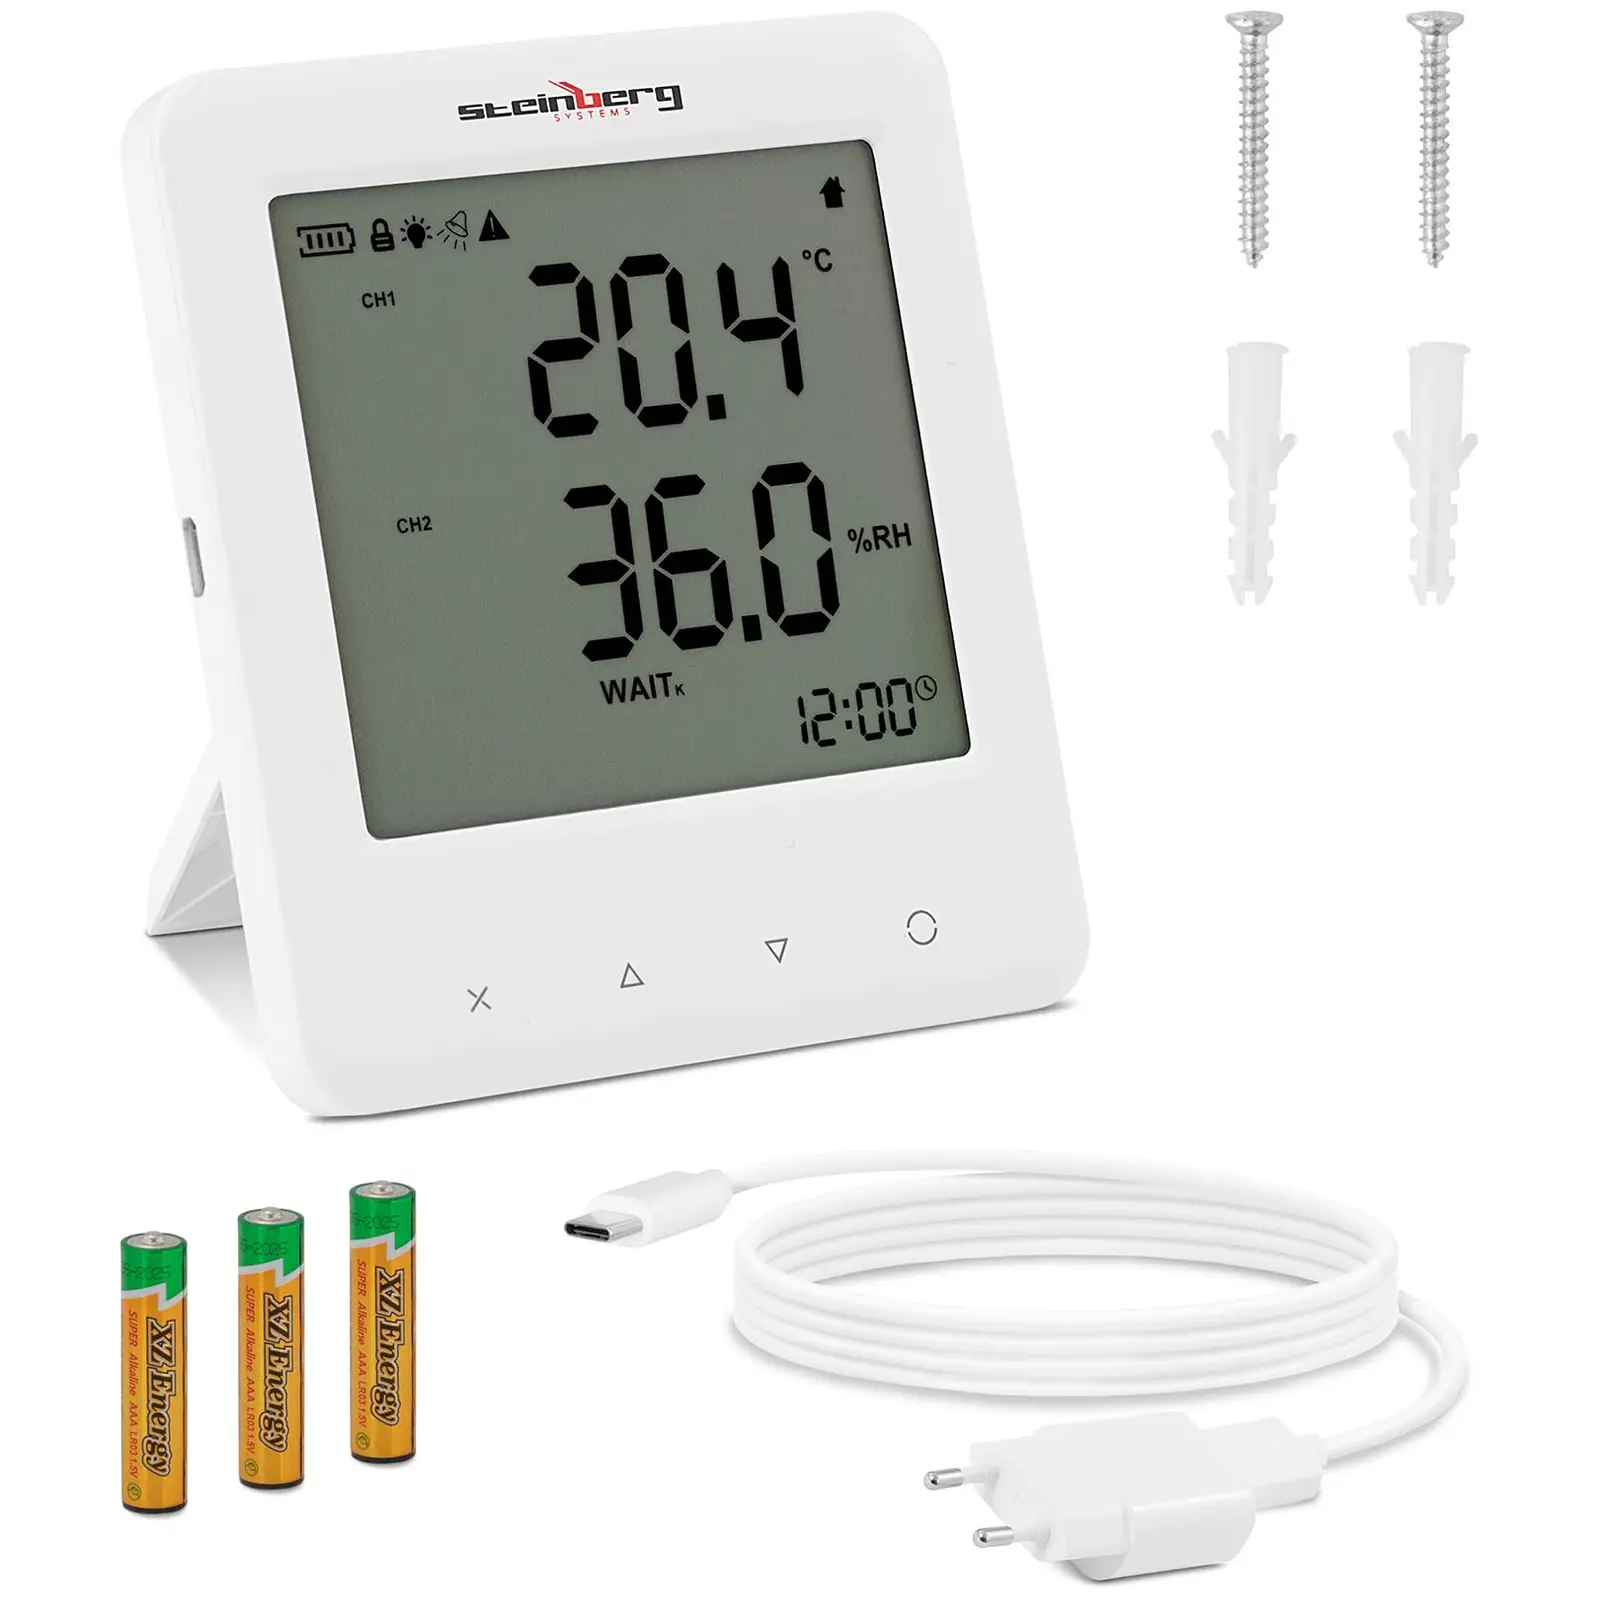 Co2 Meter Carbon Dioxide Meter With Temperature And Humidity Thermo Hygrometer